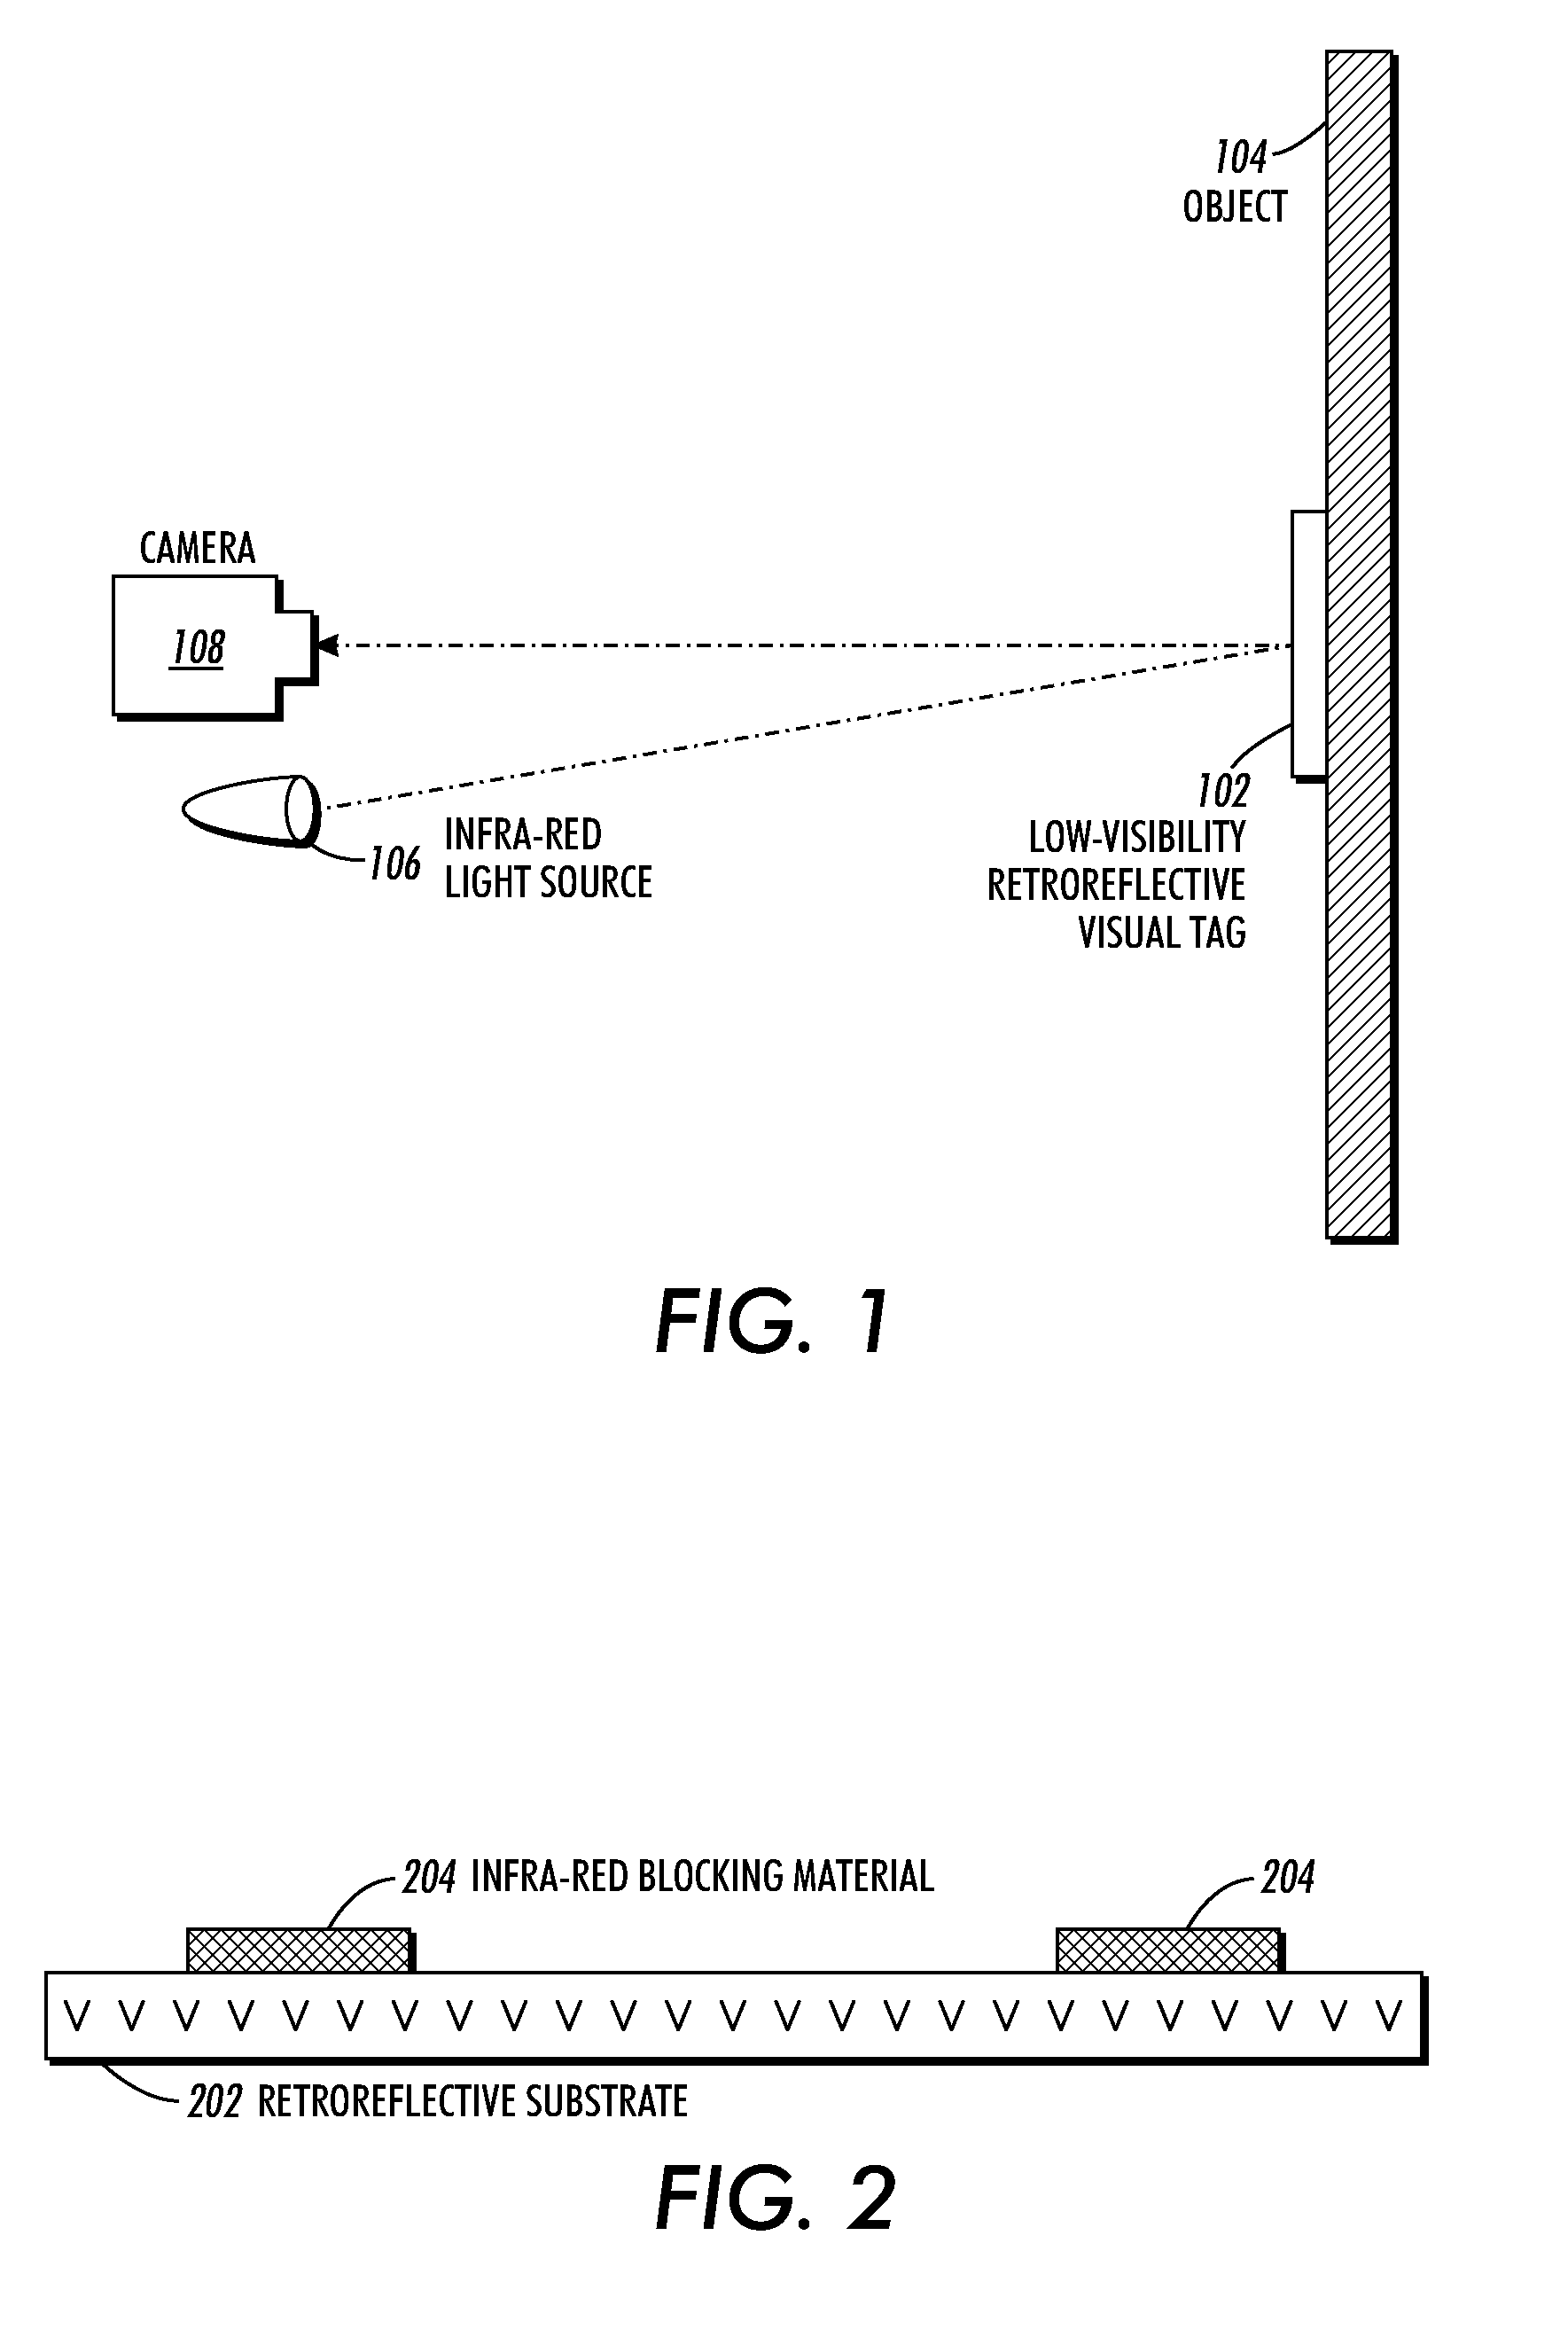 Methods for producing low-visibility retroreflective visual tags